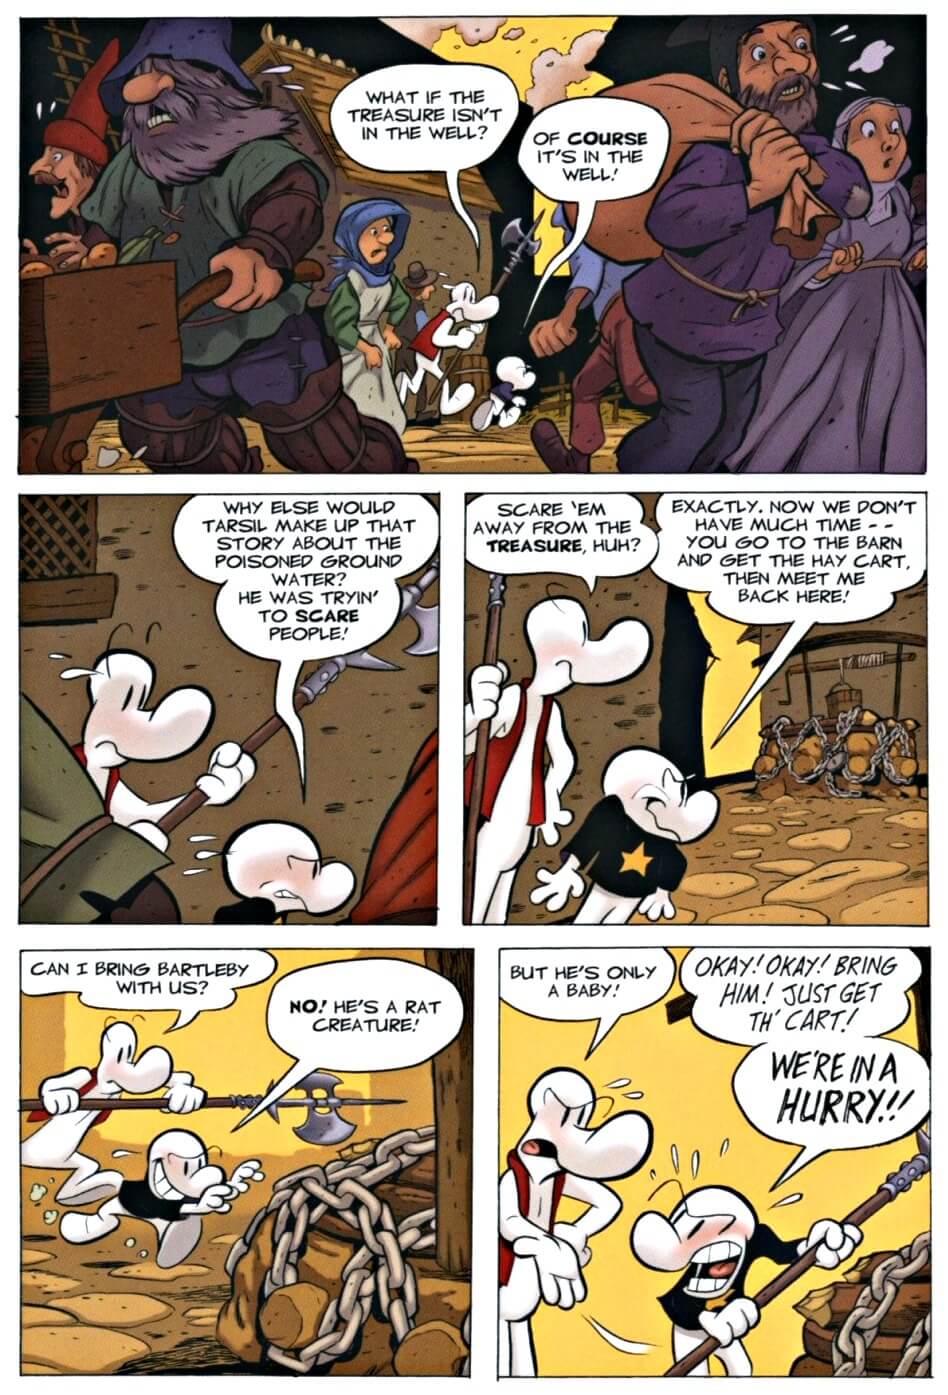 page 69 chapter 3 of bone 9 crown of horns graphic novel